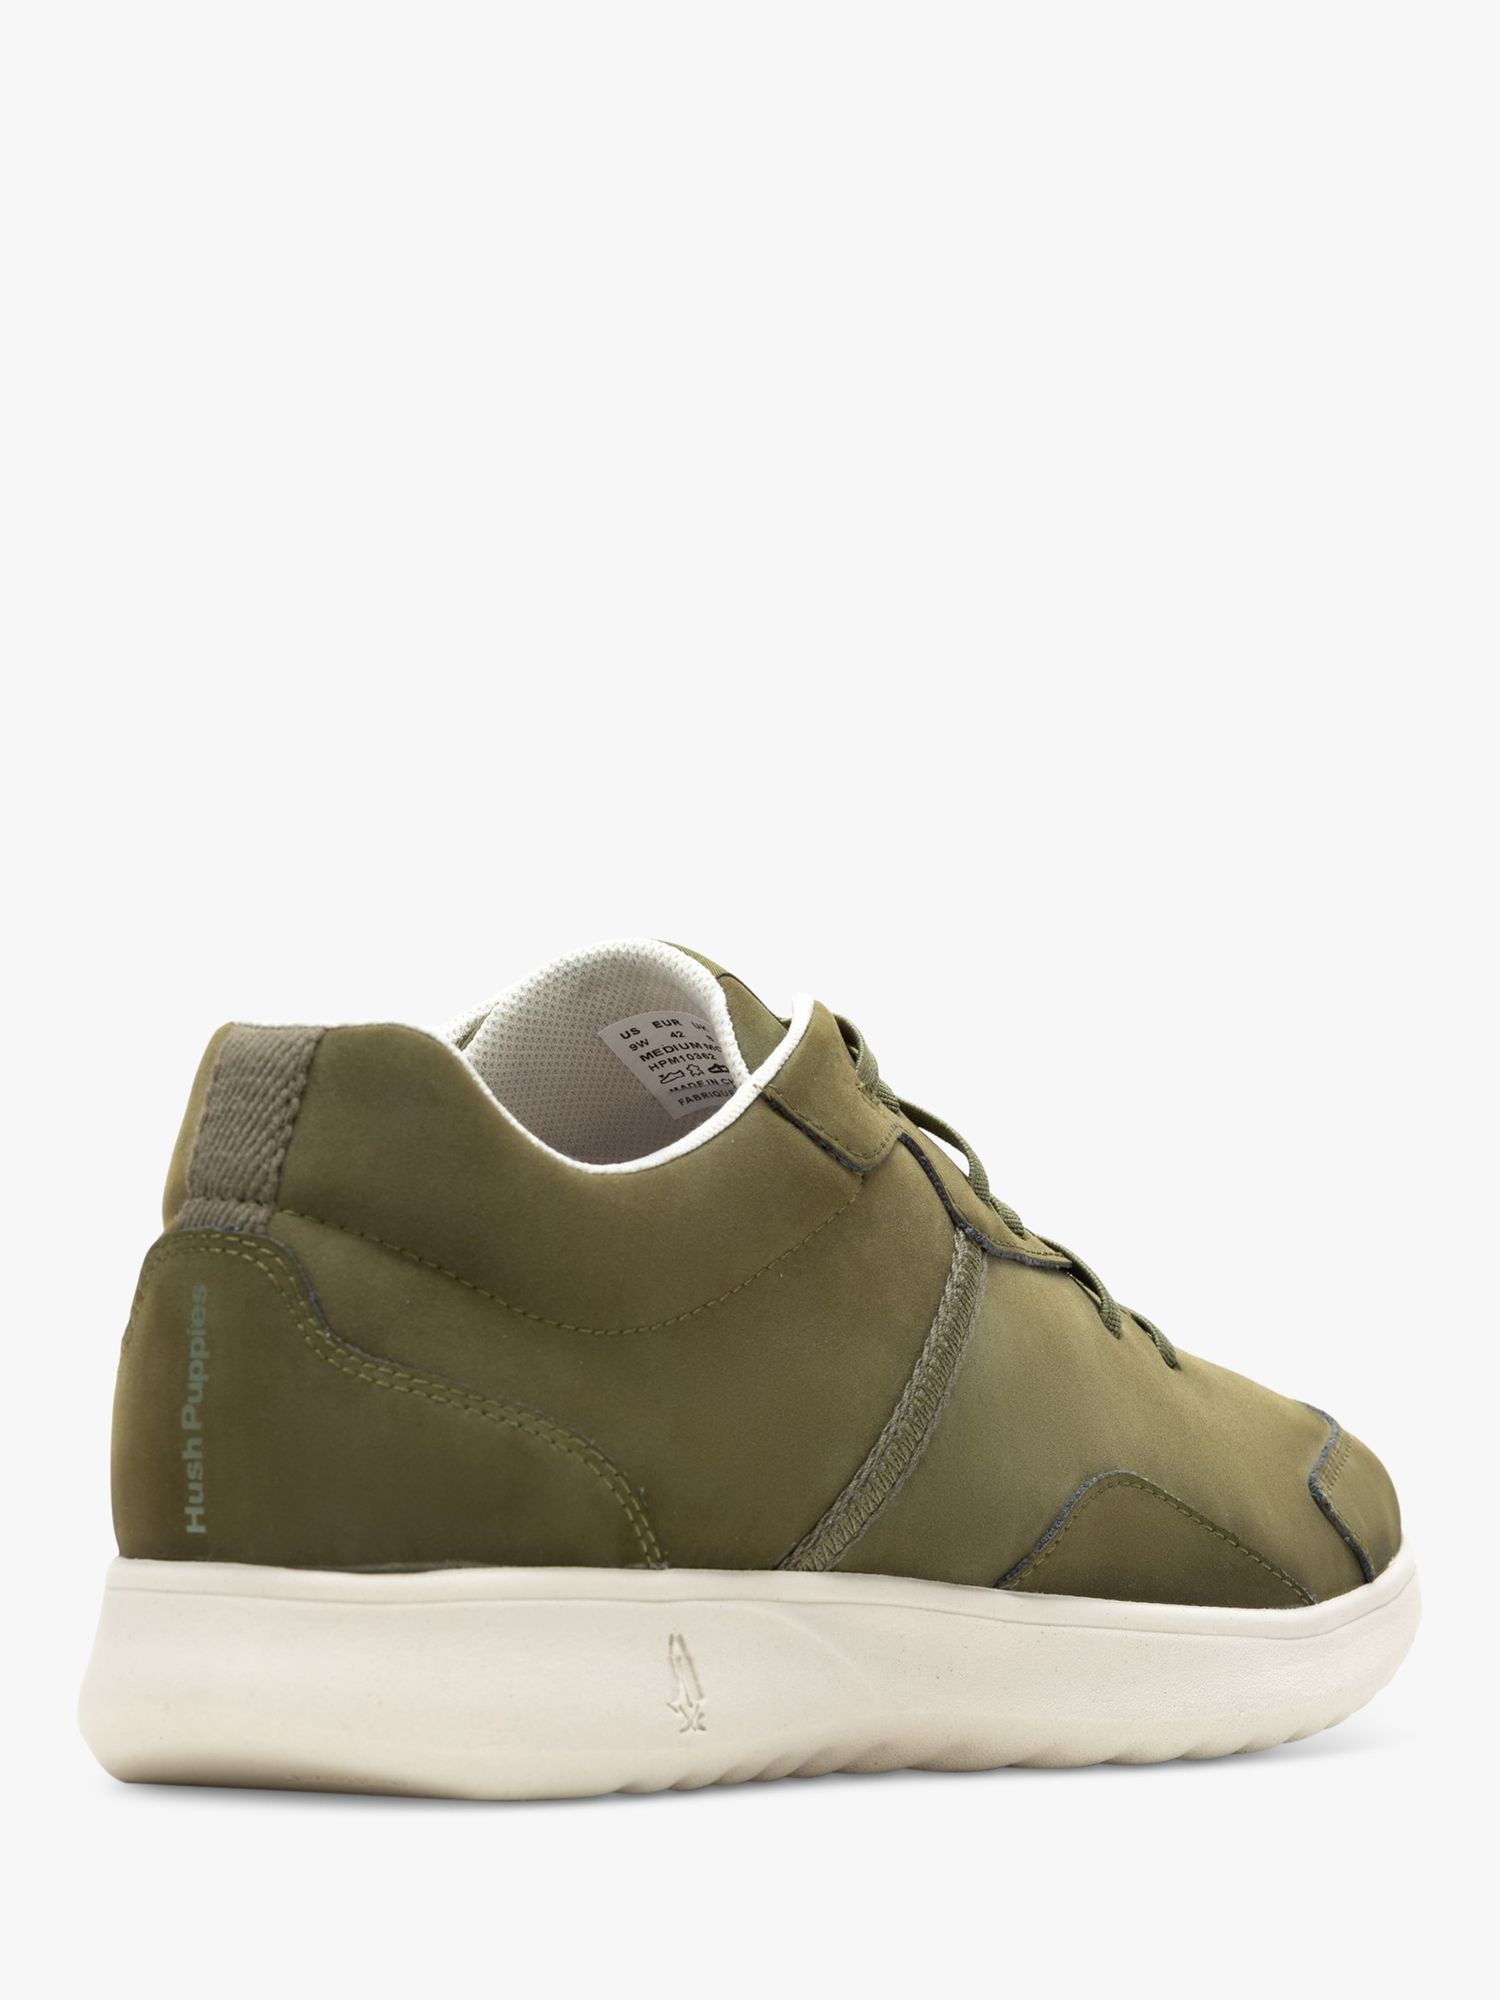 Hush Puppies The Good Trainers, Olive, 6